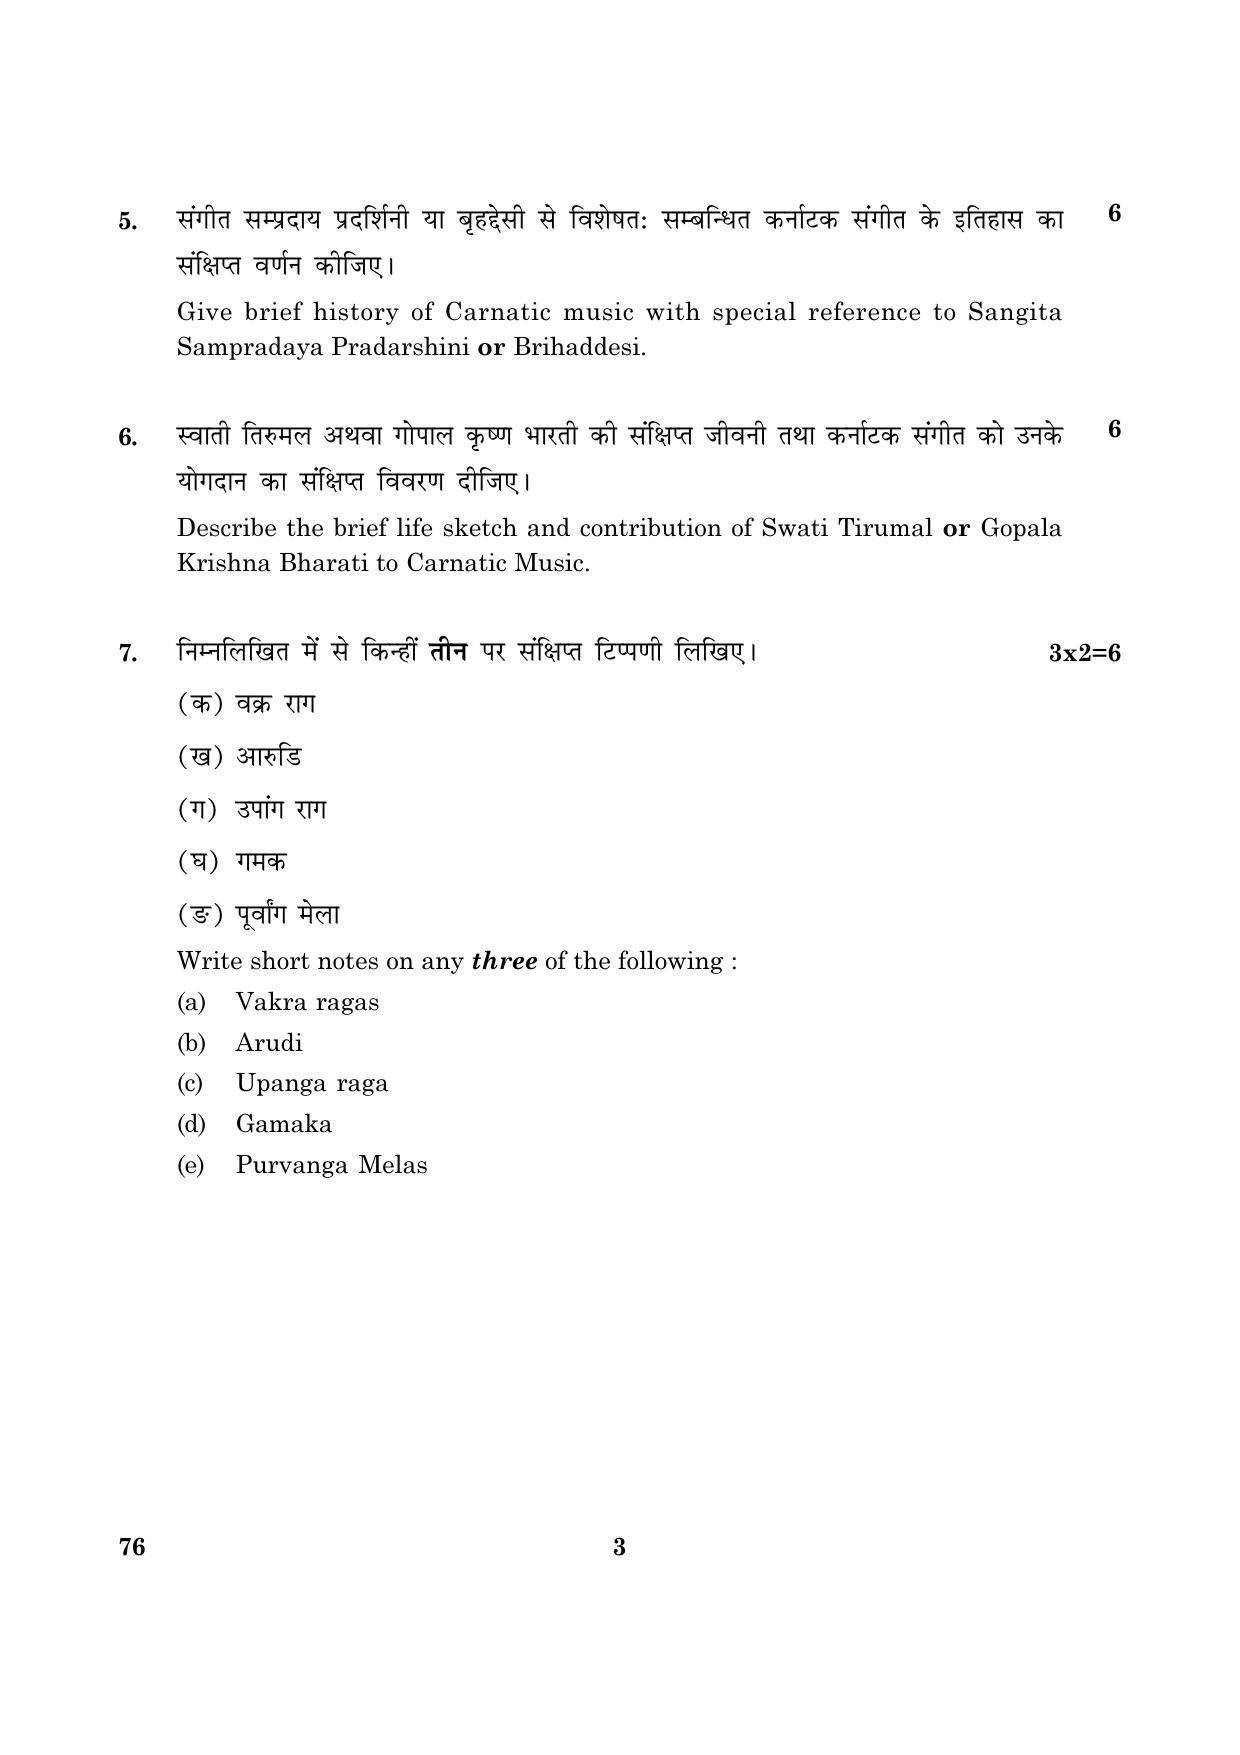 CBSE Class 12 076 Carnatic Music (Vocal) 2016 Question Paper - Page 3